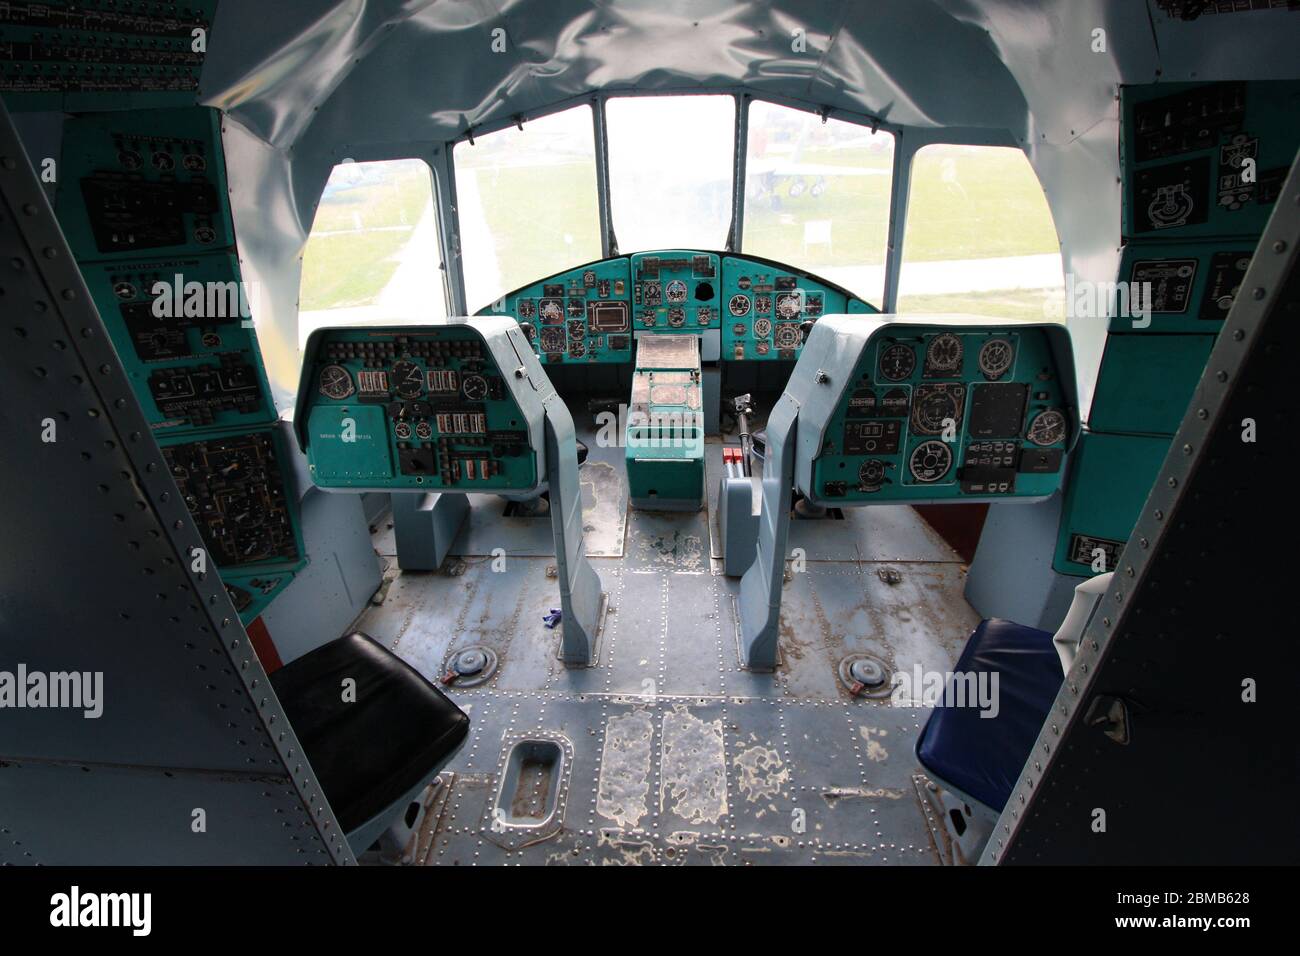 Interior view of the cockpit of a Mil Mi-26 'Halo' super heavy-lift helicopter at the Zhulyany State Aviation Museum of Ukraine Stock Photo